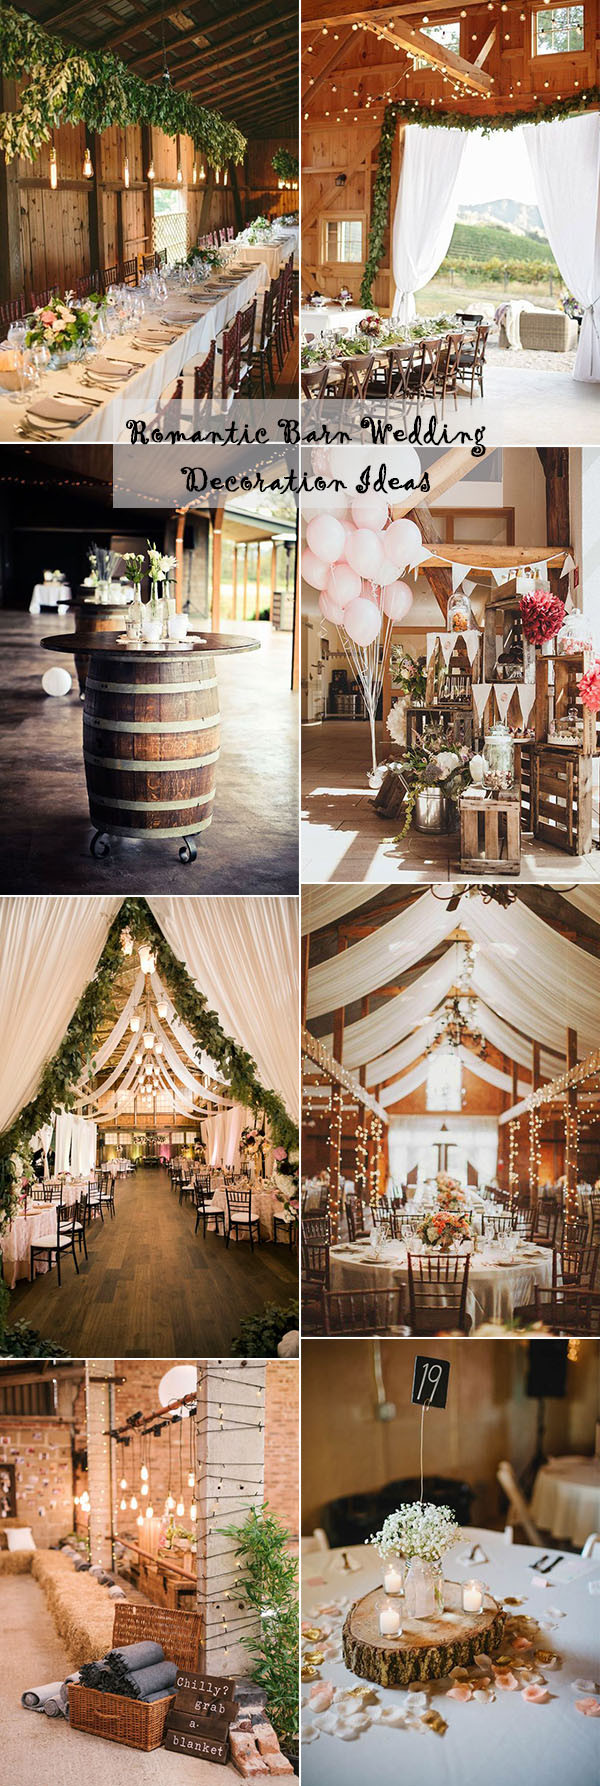 Rustic Wedding Decoration Ideas
 25 Sweet And Romantic Rustic Barn Wedding Decoration Ideas